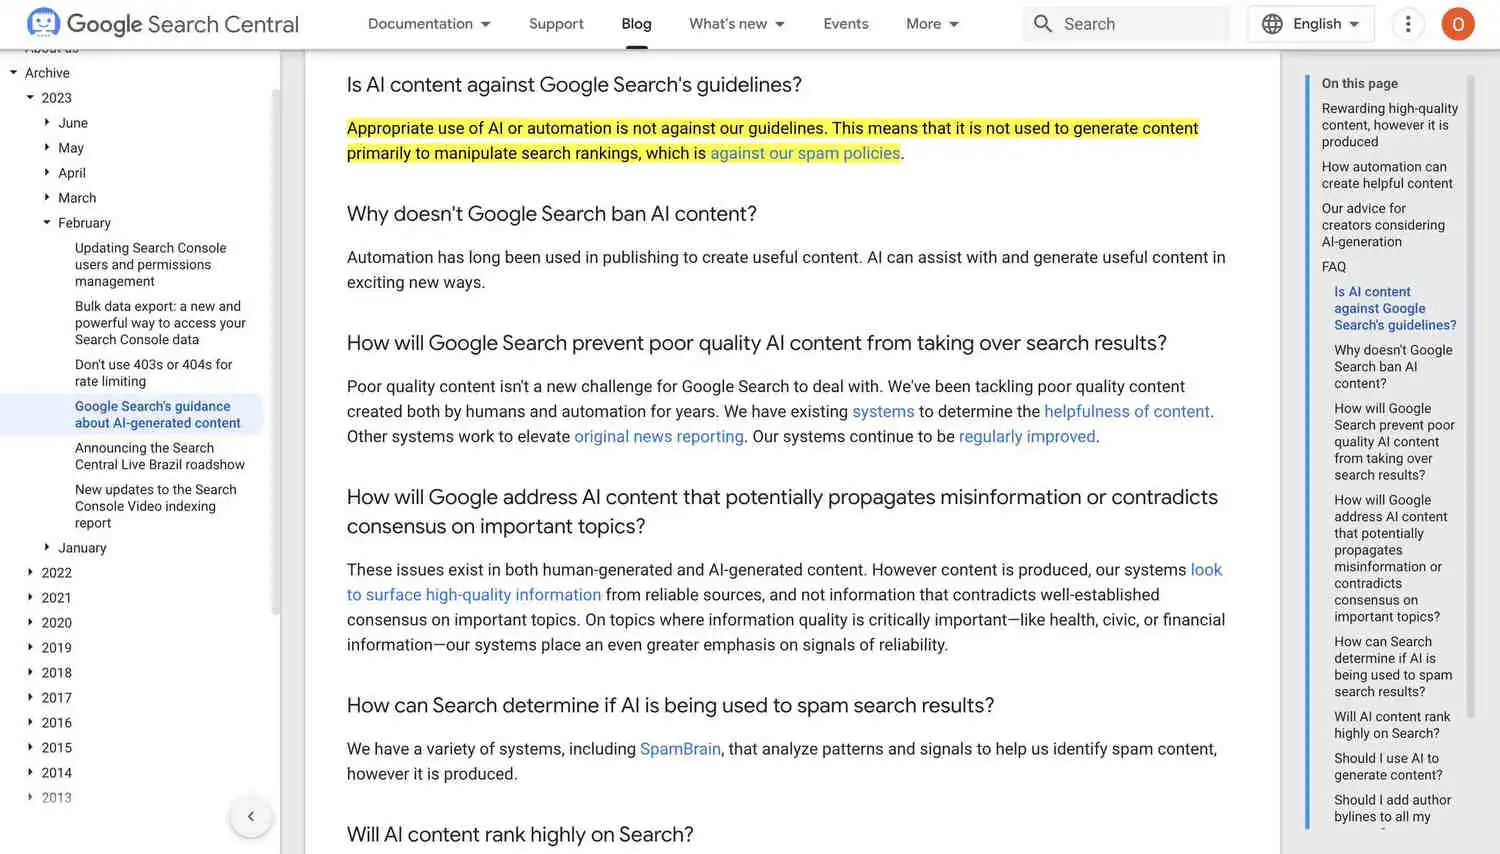 Google's documentation commenting on their stance on AI content generation.